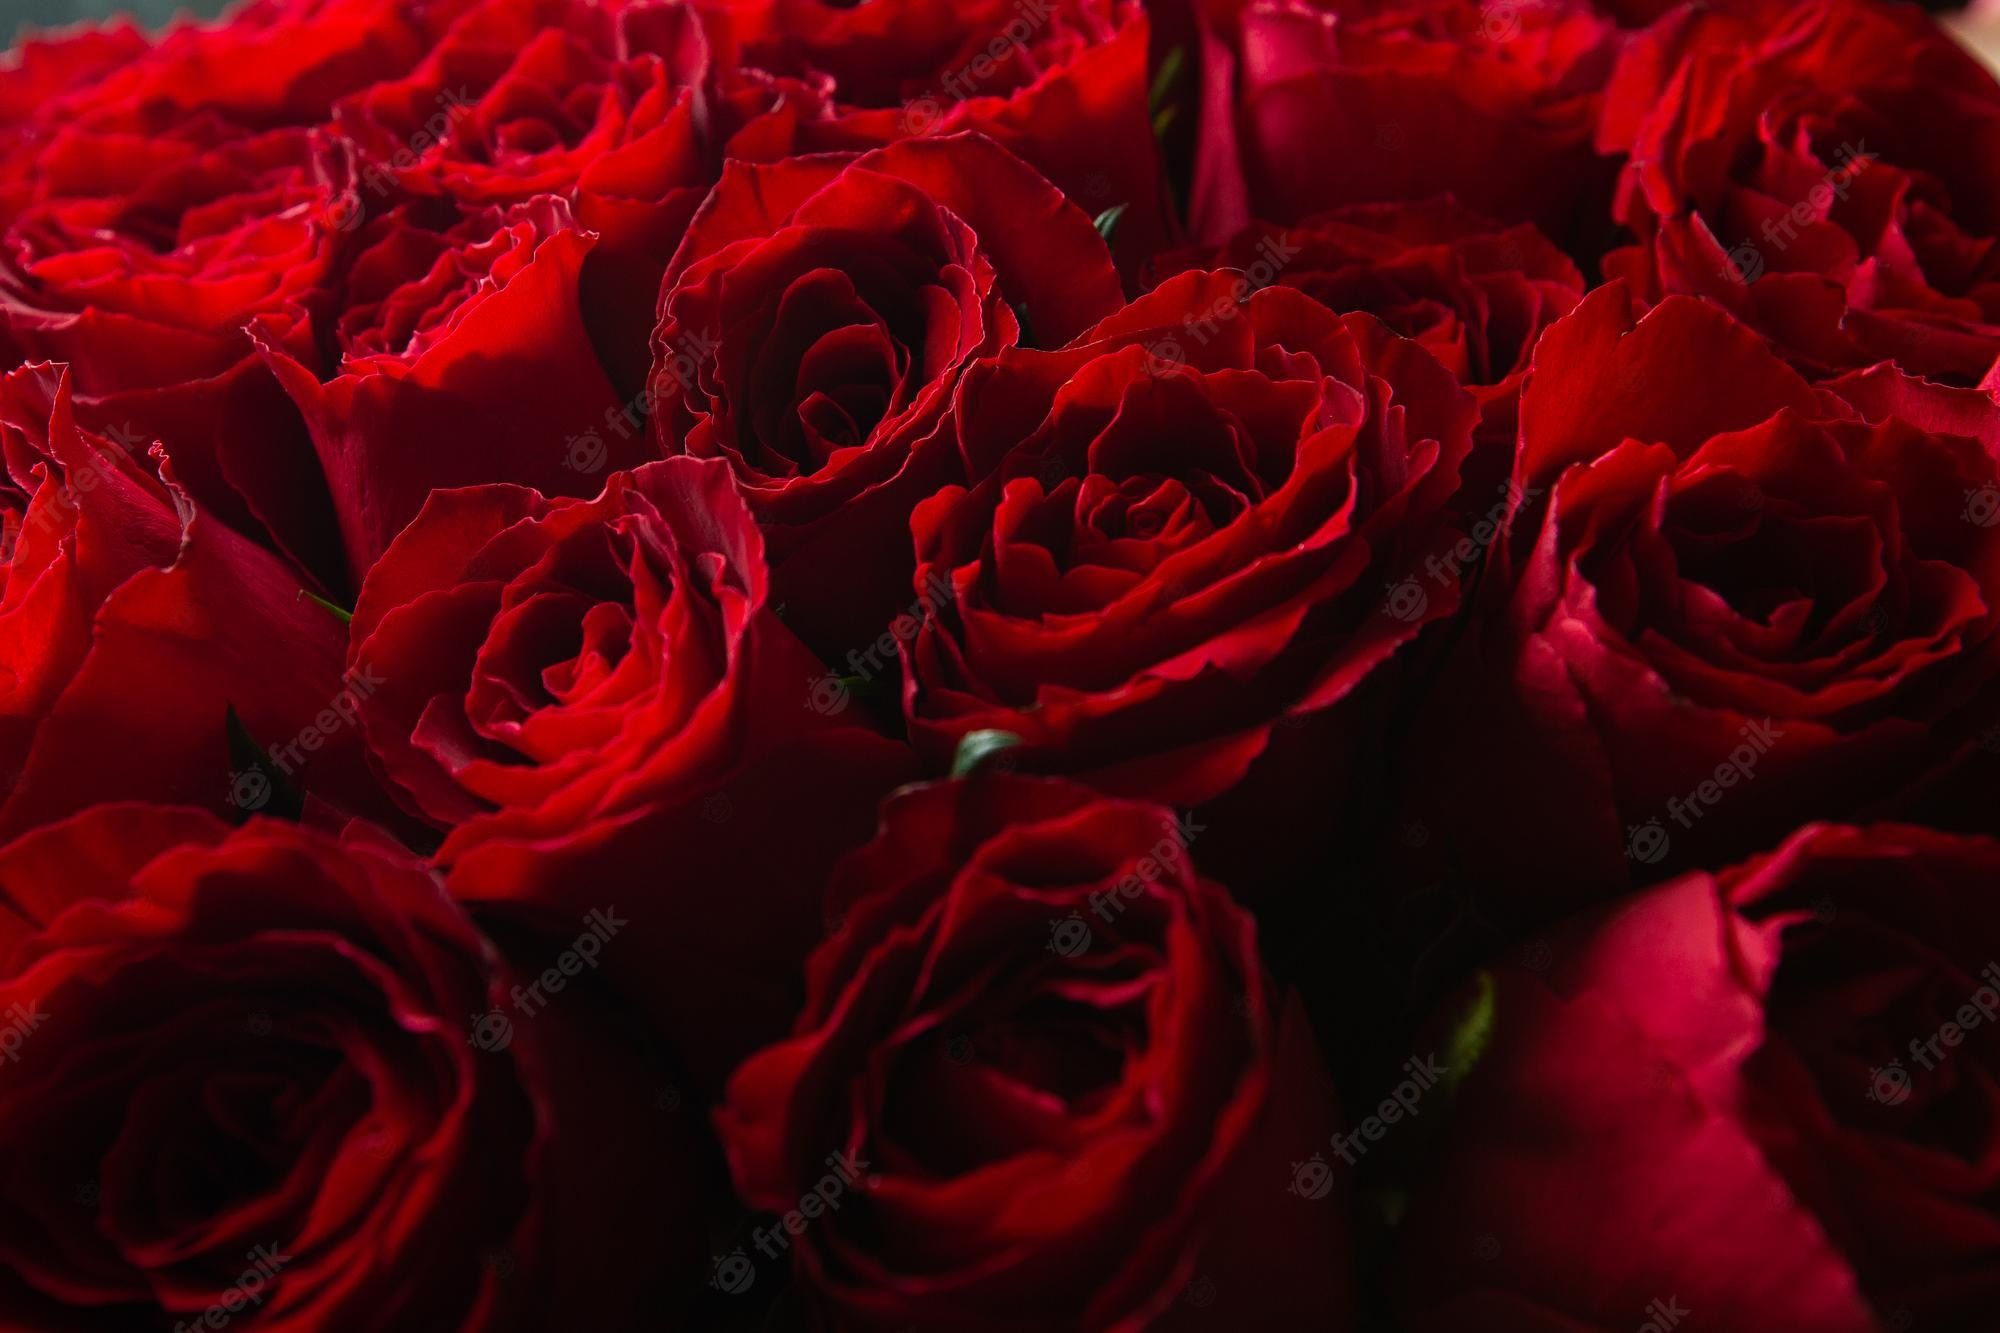 A close up of red roses in the center - Roses